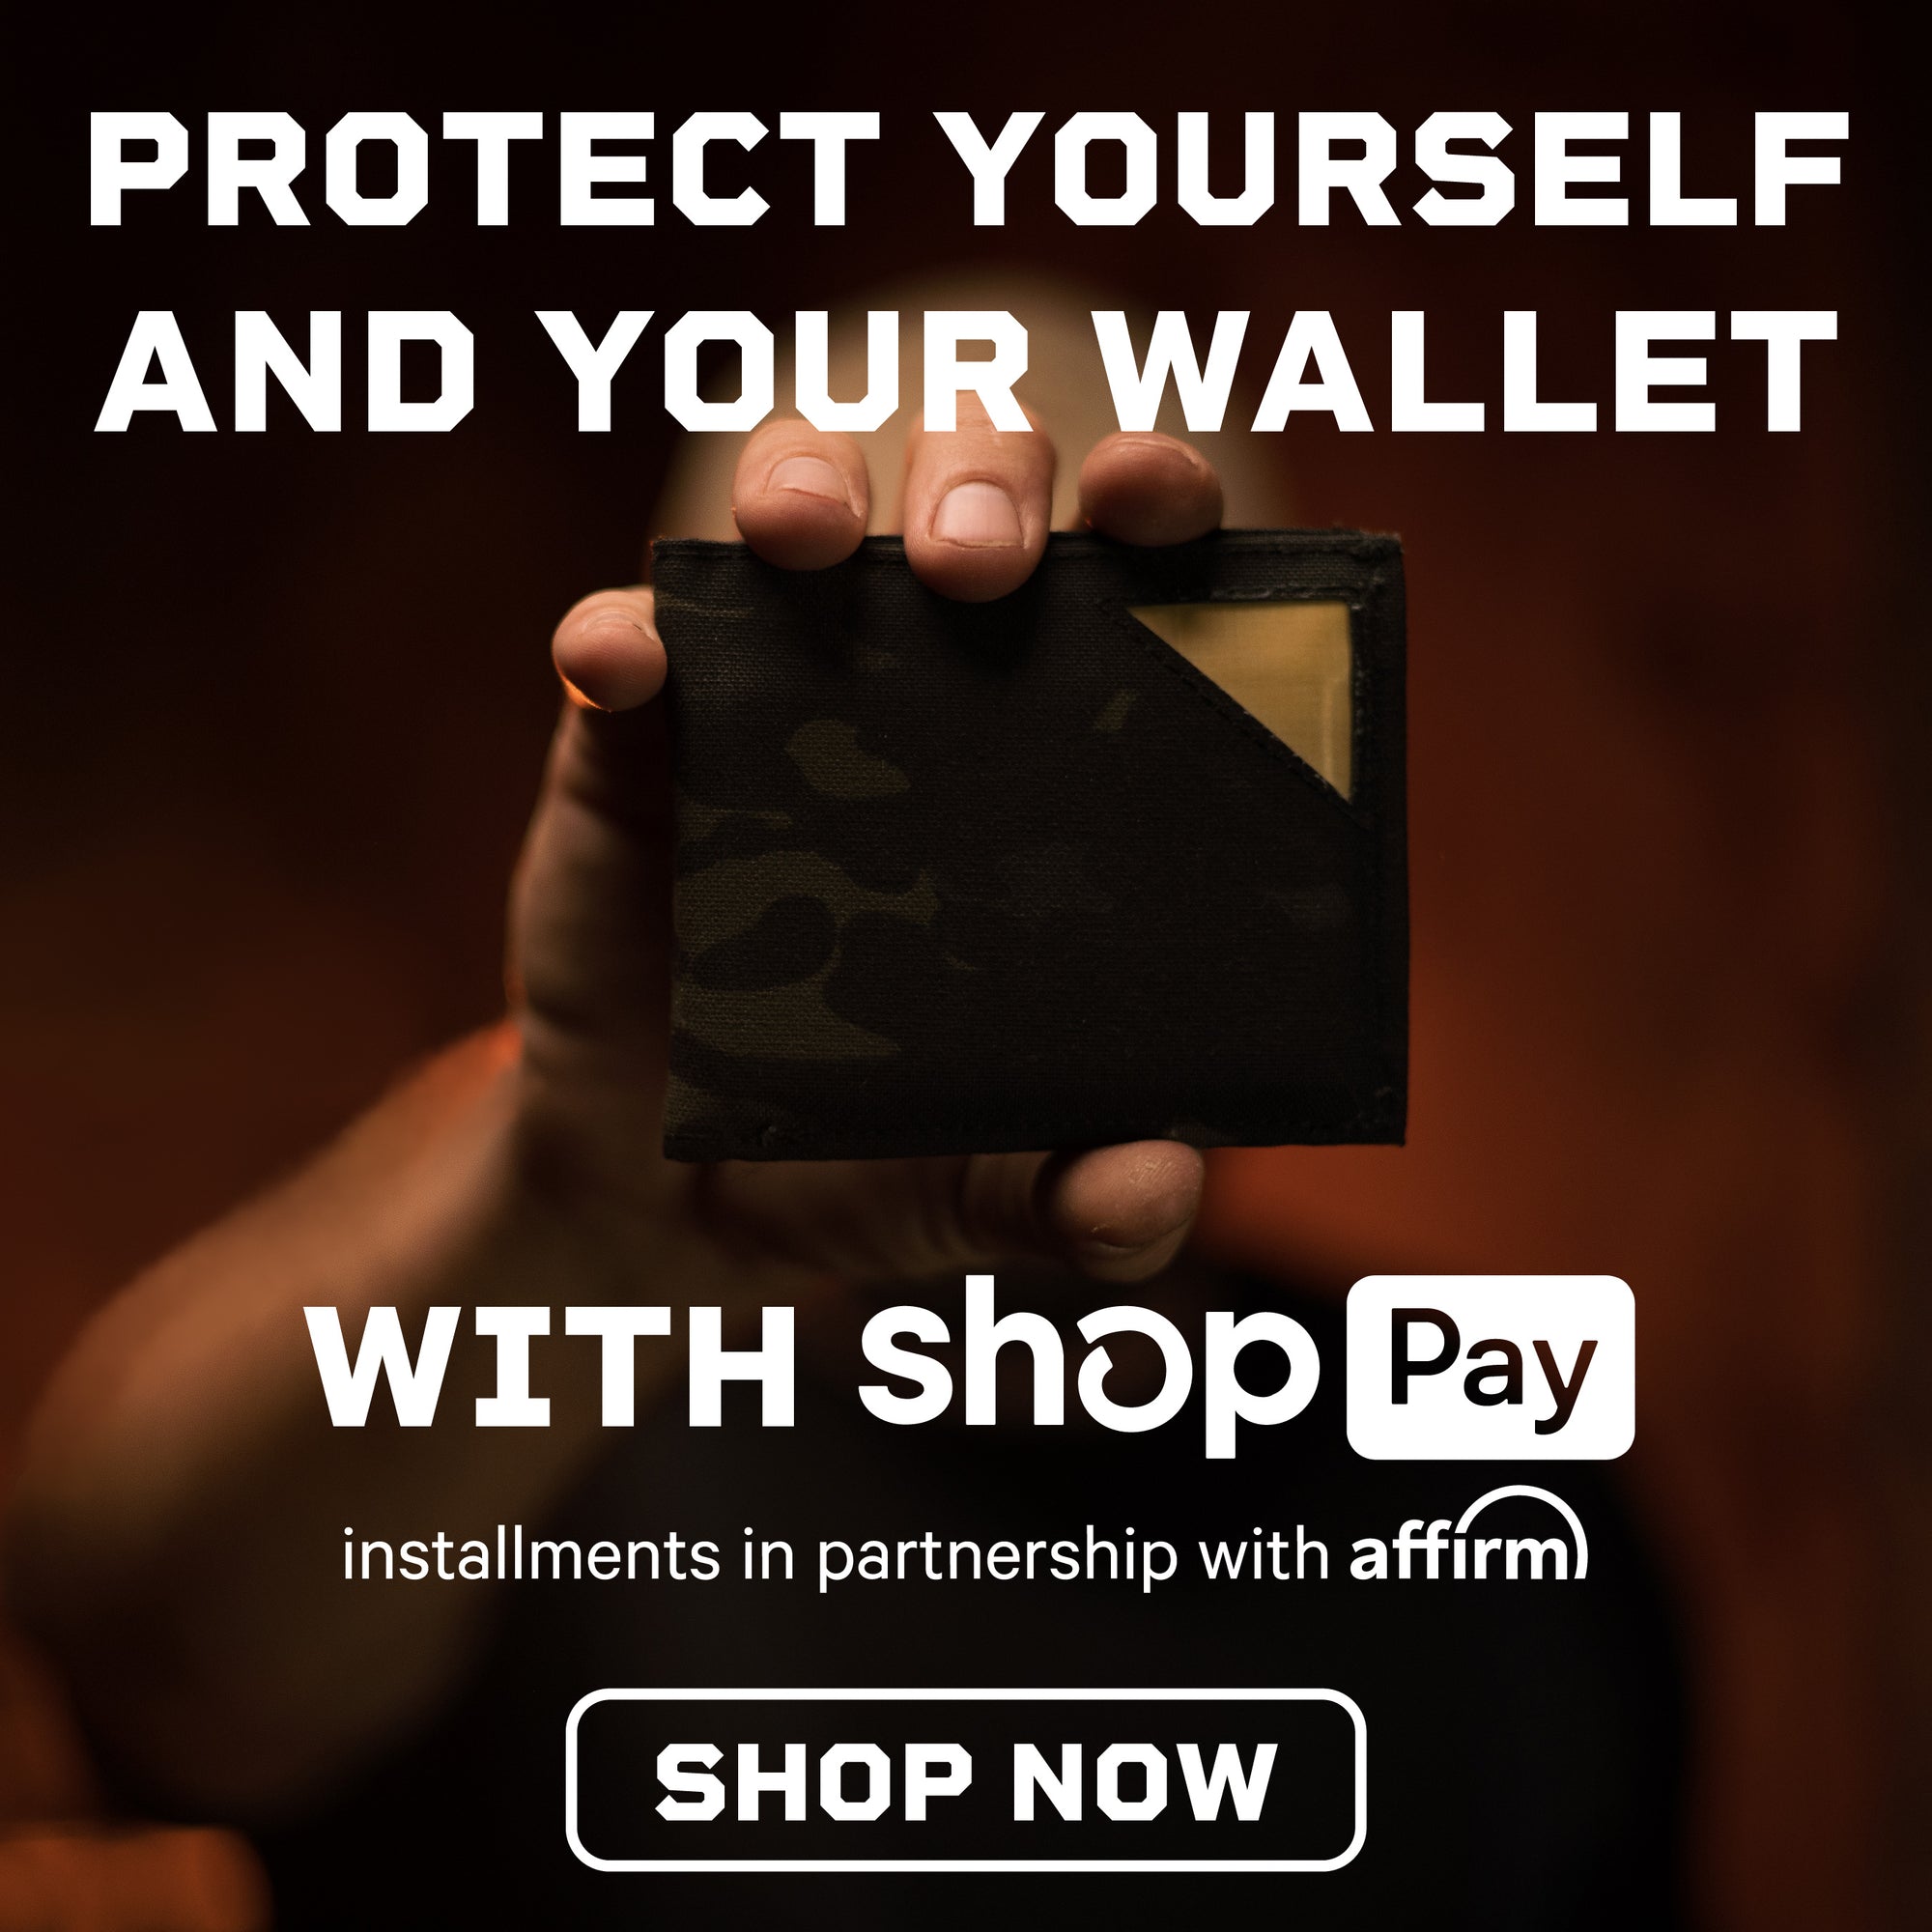 affordable body armor with shoppay installments